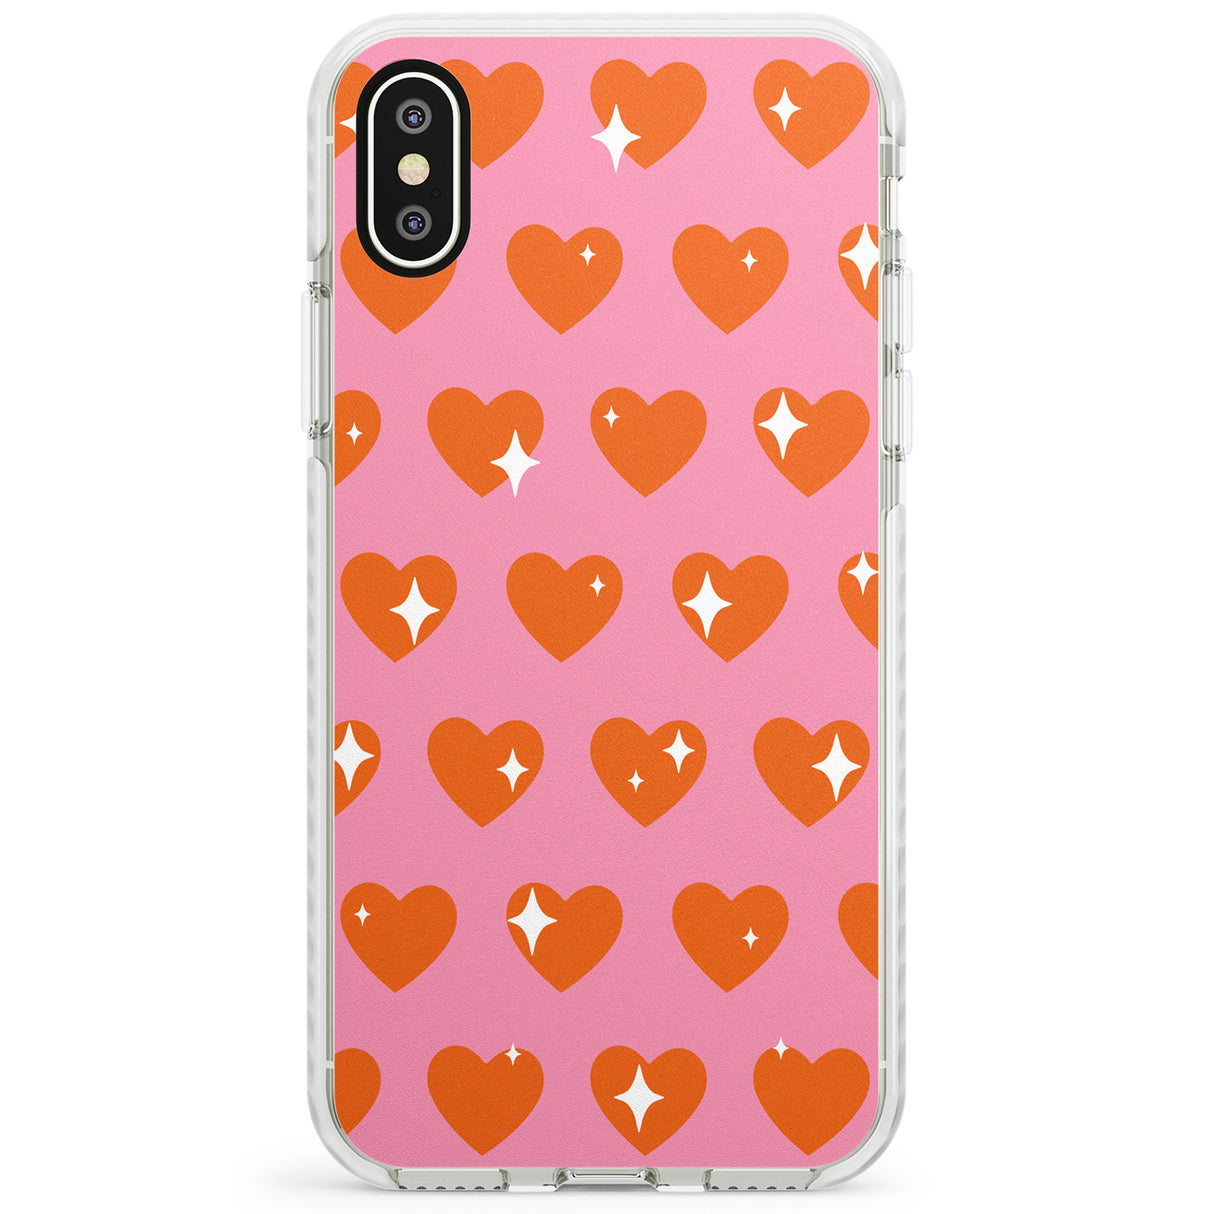 Sweet Hearts (Sunset) Impact Phone Case for iPhone X XS Max XR